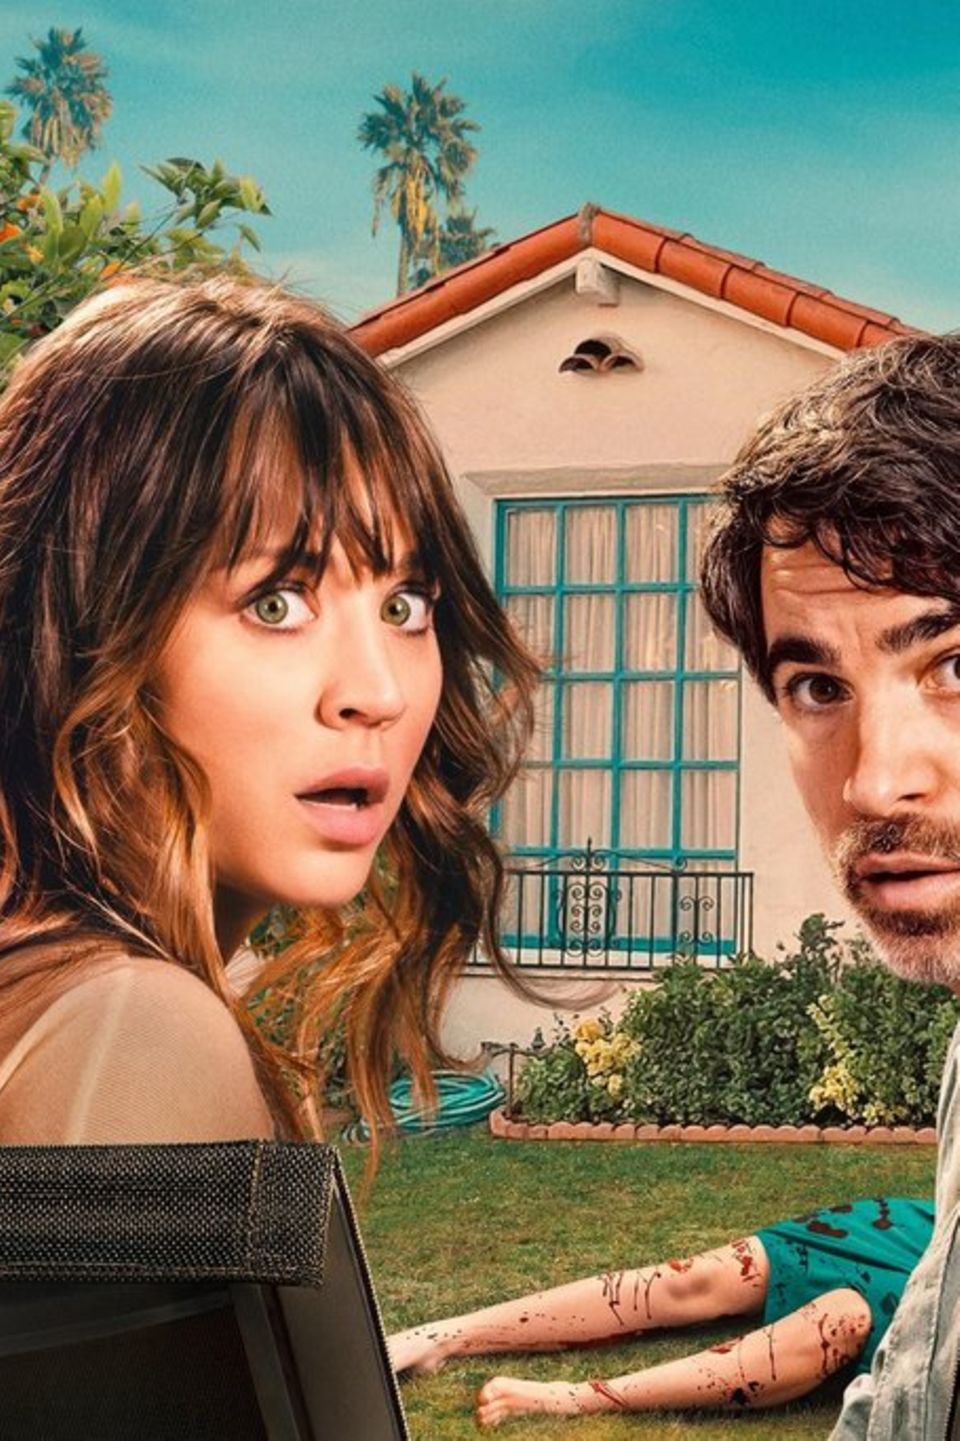 Mord ist ihr Hobby: Kaley Cuoco und Chris Messina in "Based on a True Story".